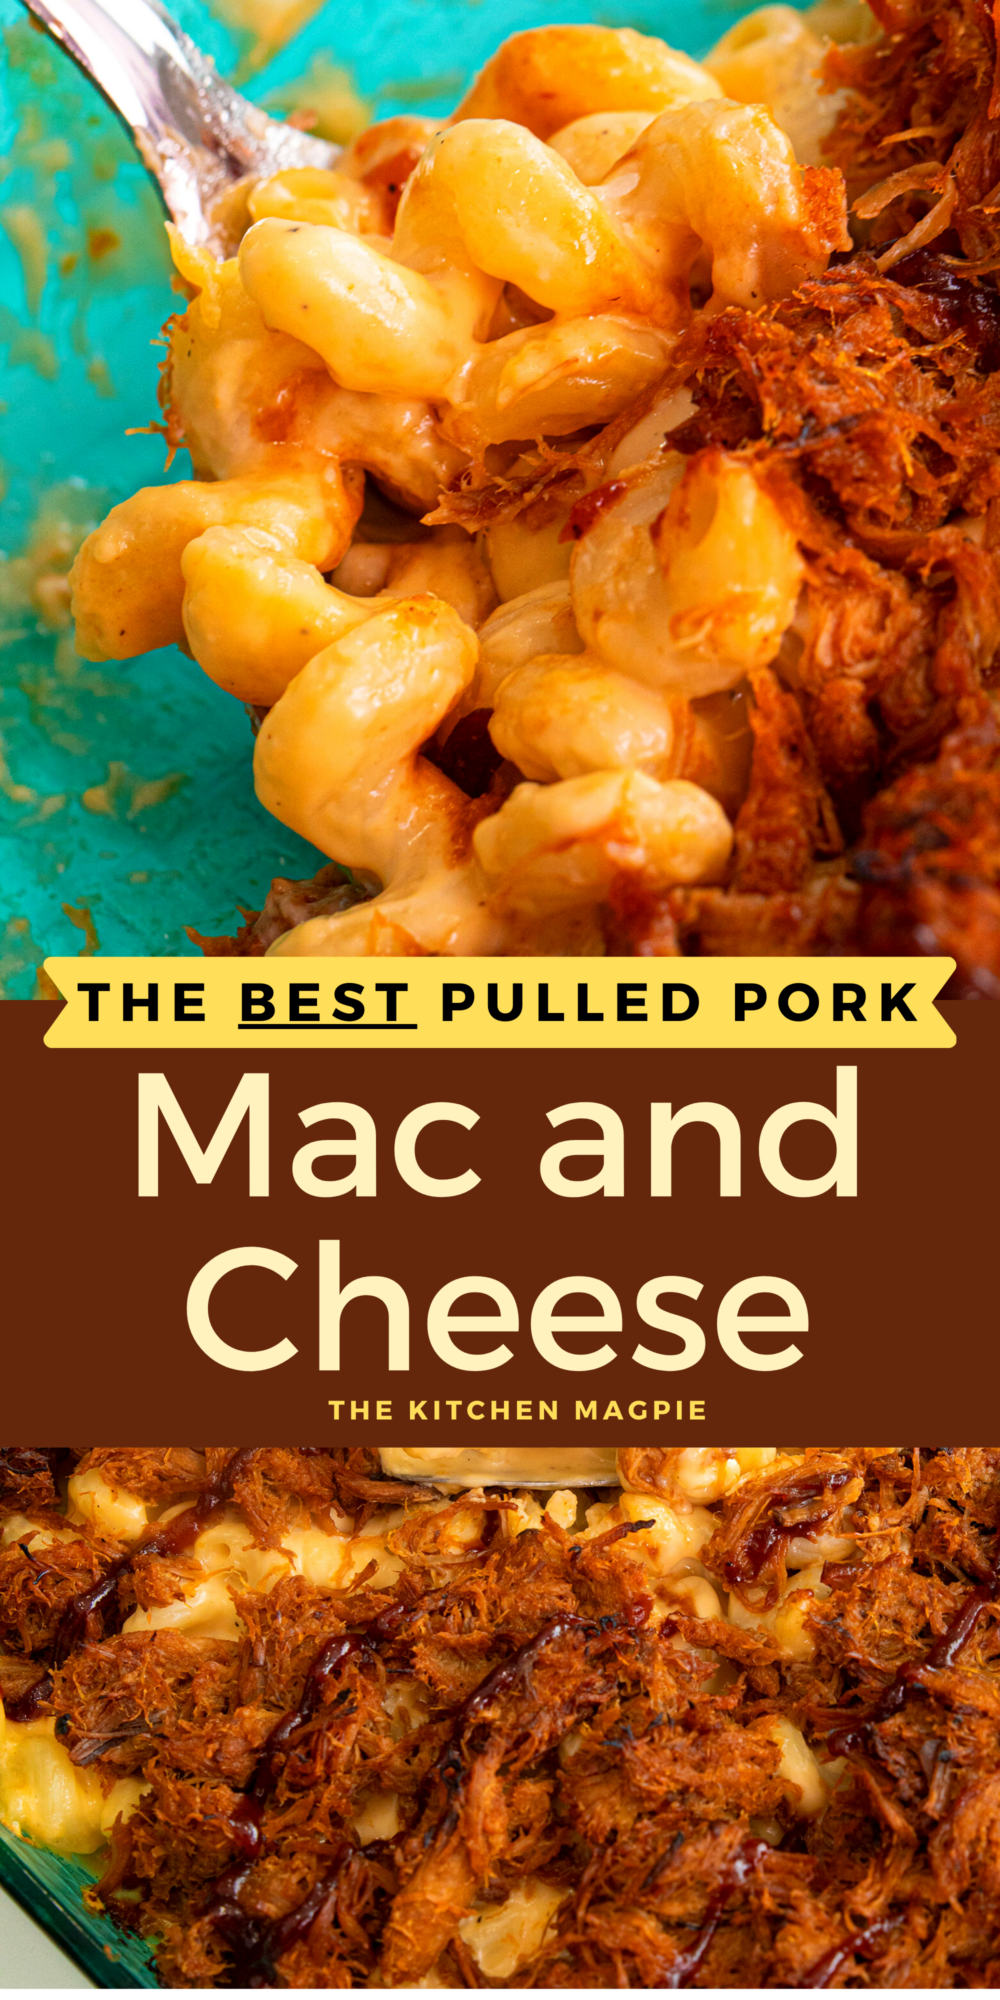 Decadent homemade mac and cheese topped with BBQ-flavored pulled pork, then baked to hot cheesy perfection! Great for leftover pulled pork!